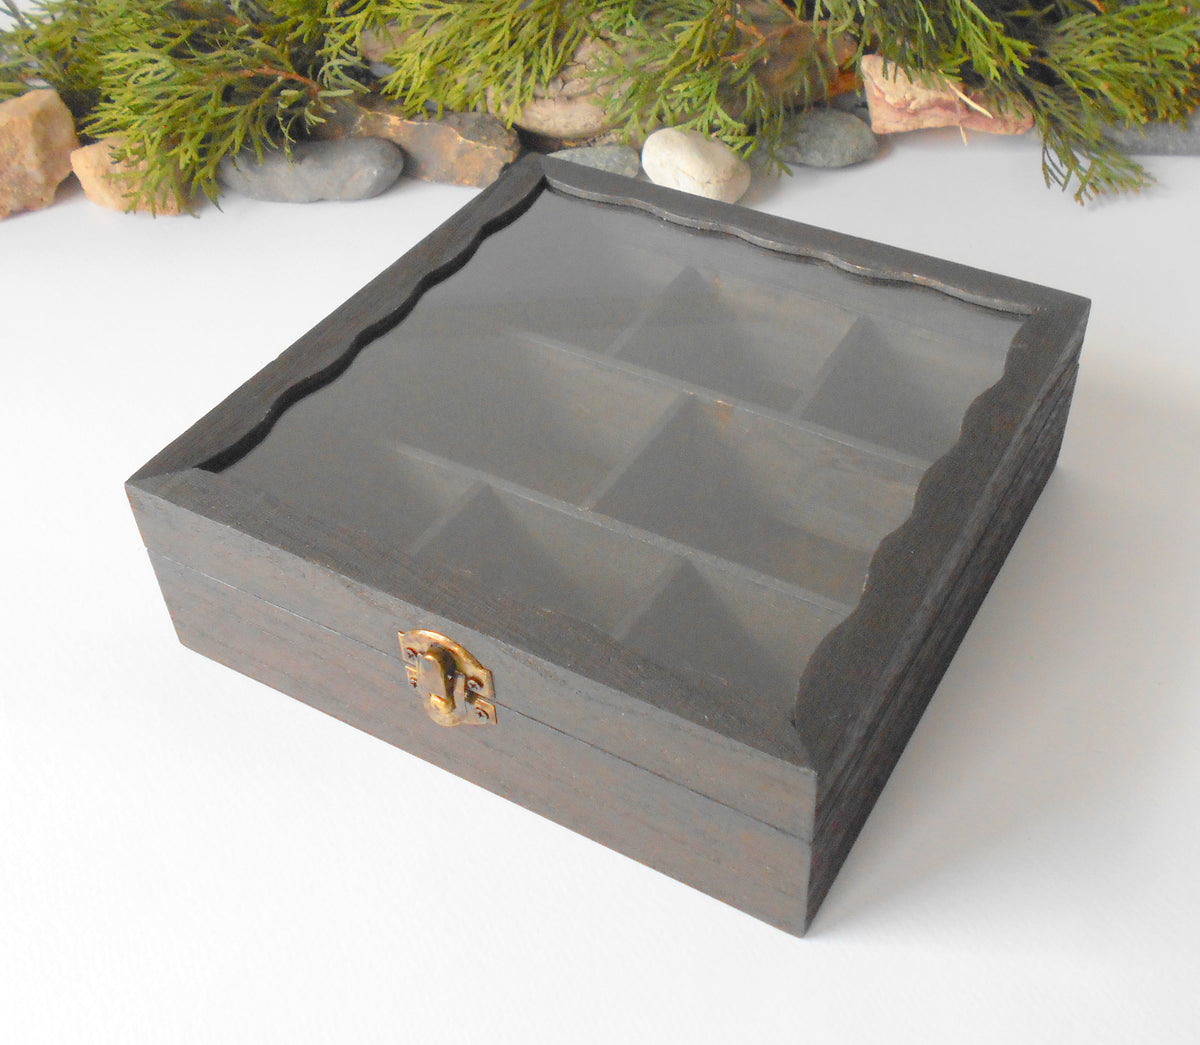 This is a wooden box with a glass display that is made of bamboo wood and that has metal hinges and closes with a bronze-color closing that may display various things like jewelry, miniatures, crystals, or other small objects of importance to you or your friends.&lt;br data-mce-fragment=&quot;1&quot;&gt;&lt;span data-mce-fragment=&quot;1&quot;&gt;I have colored the box with mordant so that it looks like an old wood vintage box with a dark brown color.&lt;/span&gt;